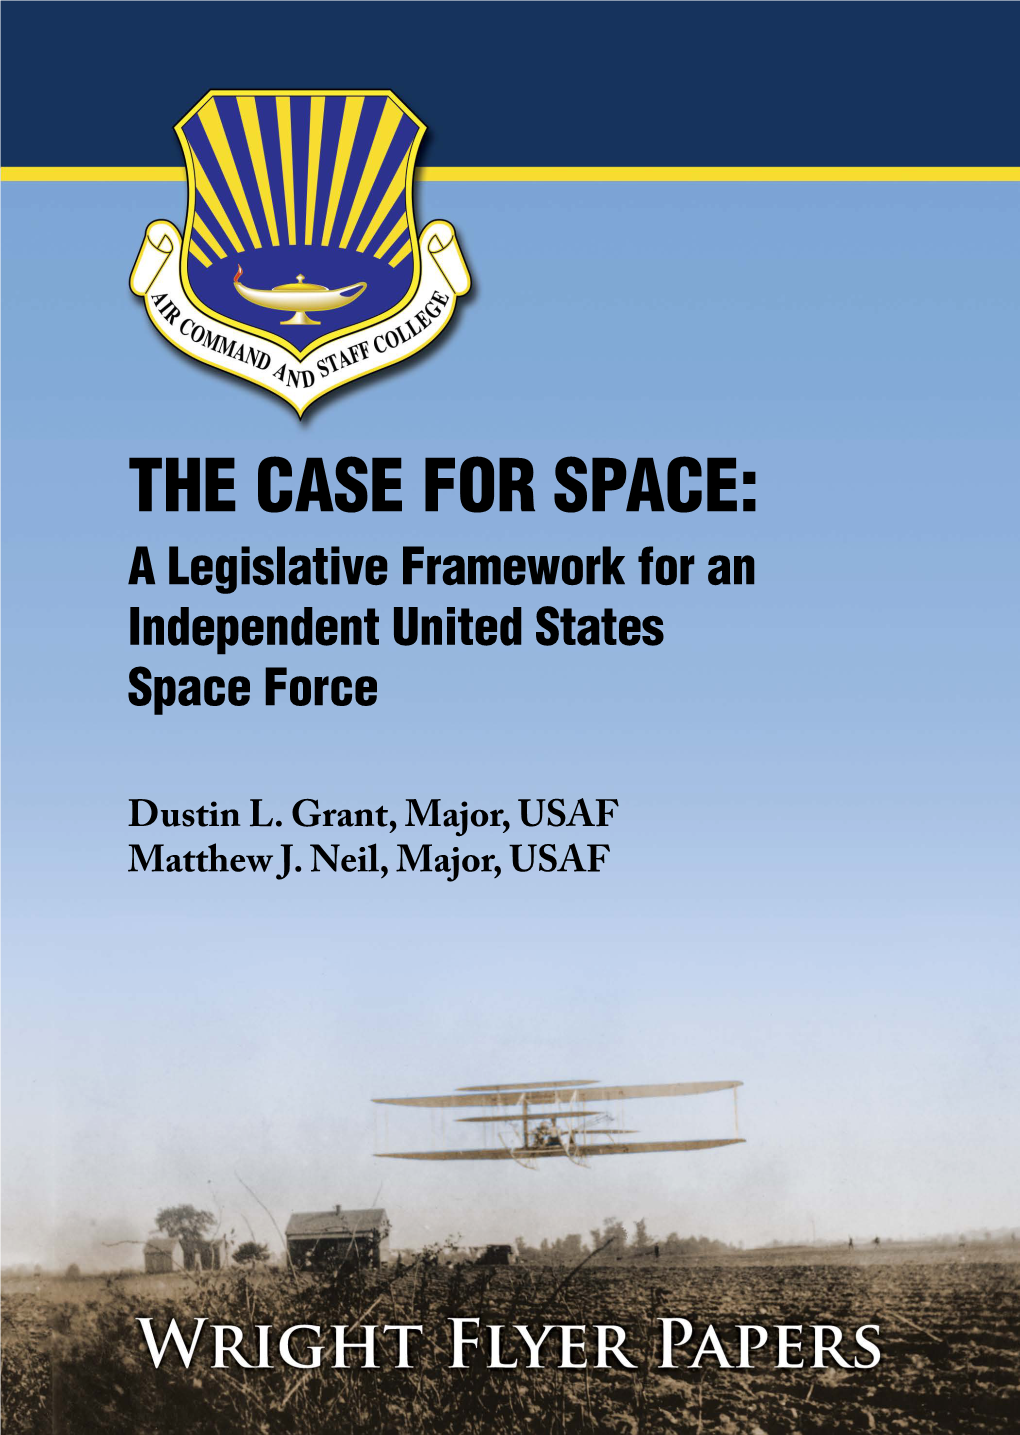 THE CASE for SPACE: a Legislative Framework for an Independent United States Space Force